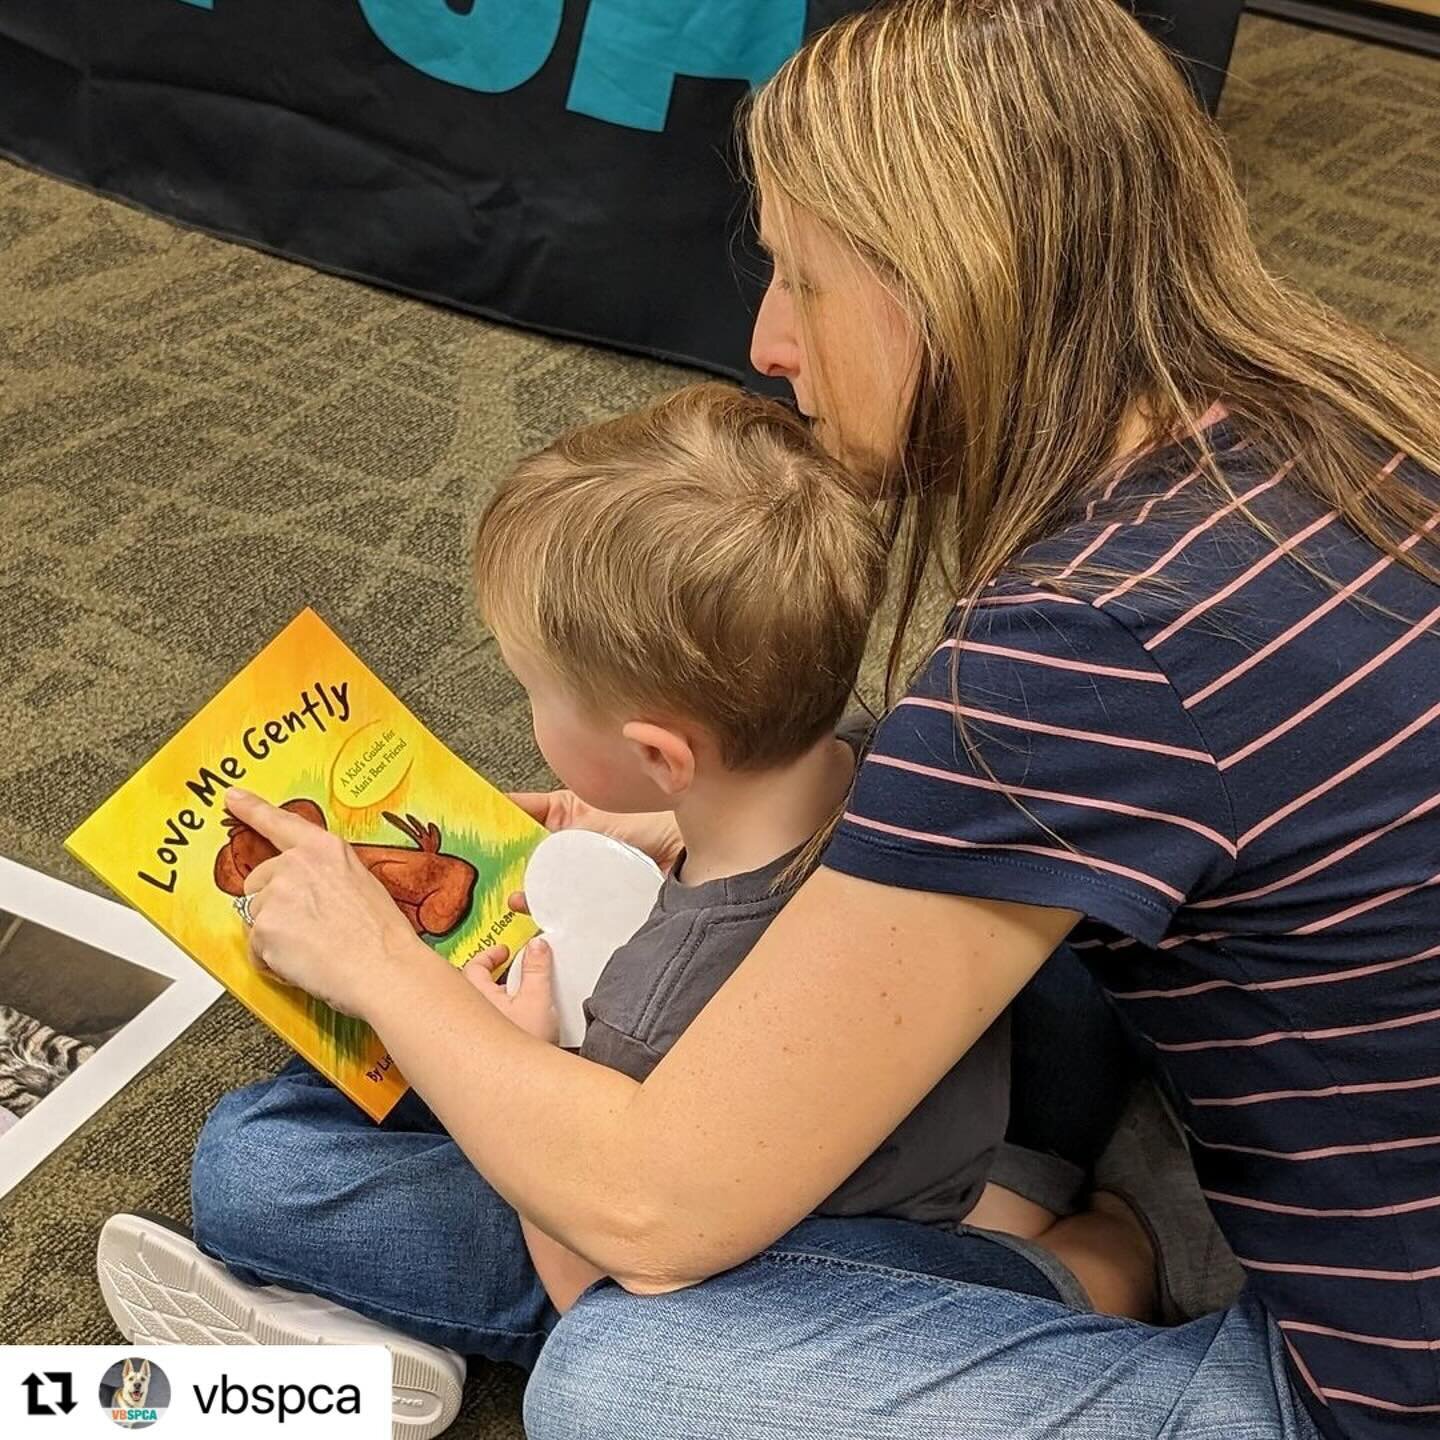 #Repost @vbspca with @use.repost
・・・
The VBSPCA is proud to partner with @tailsthatteach to educate the youngest members of our community about the importance of compassionate and responsible pet care.

Tails that Teach provides award-winning compass